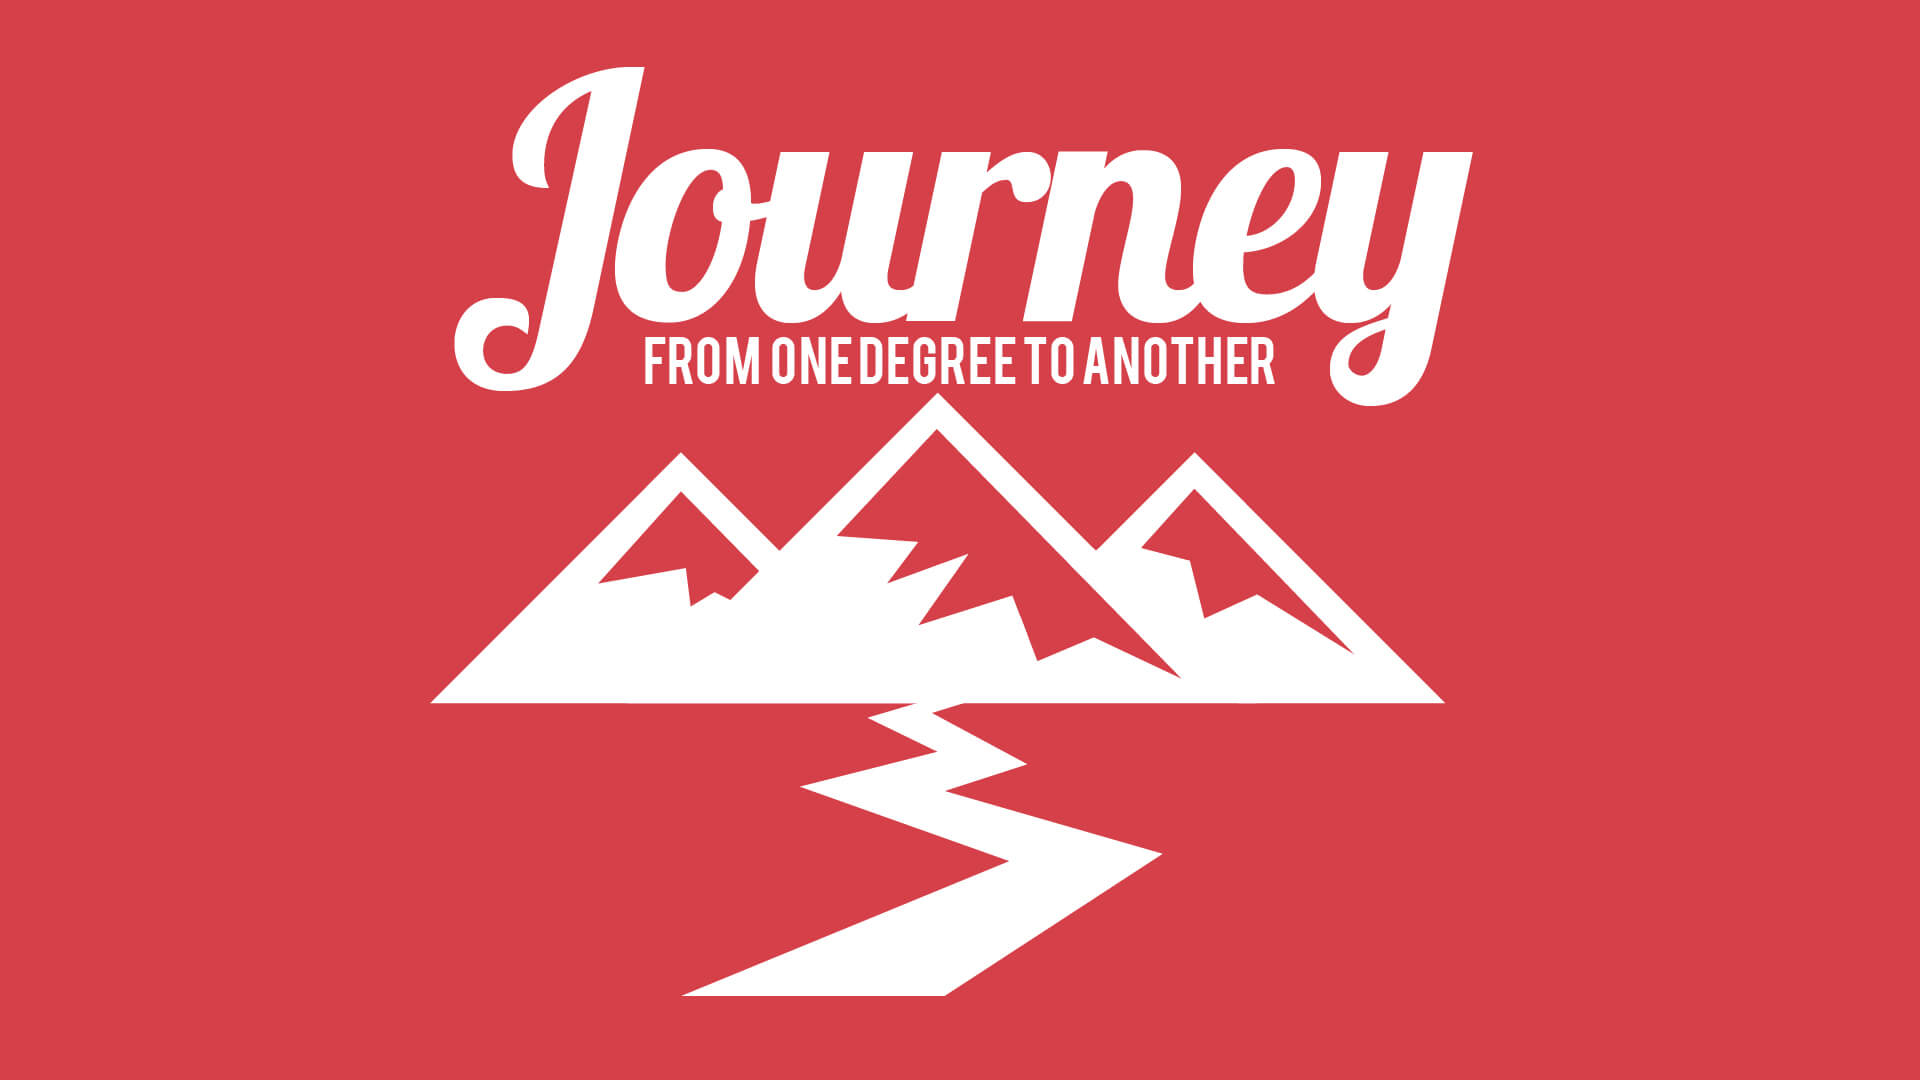 The Journey branding for Ole Miss BSU